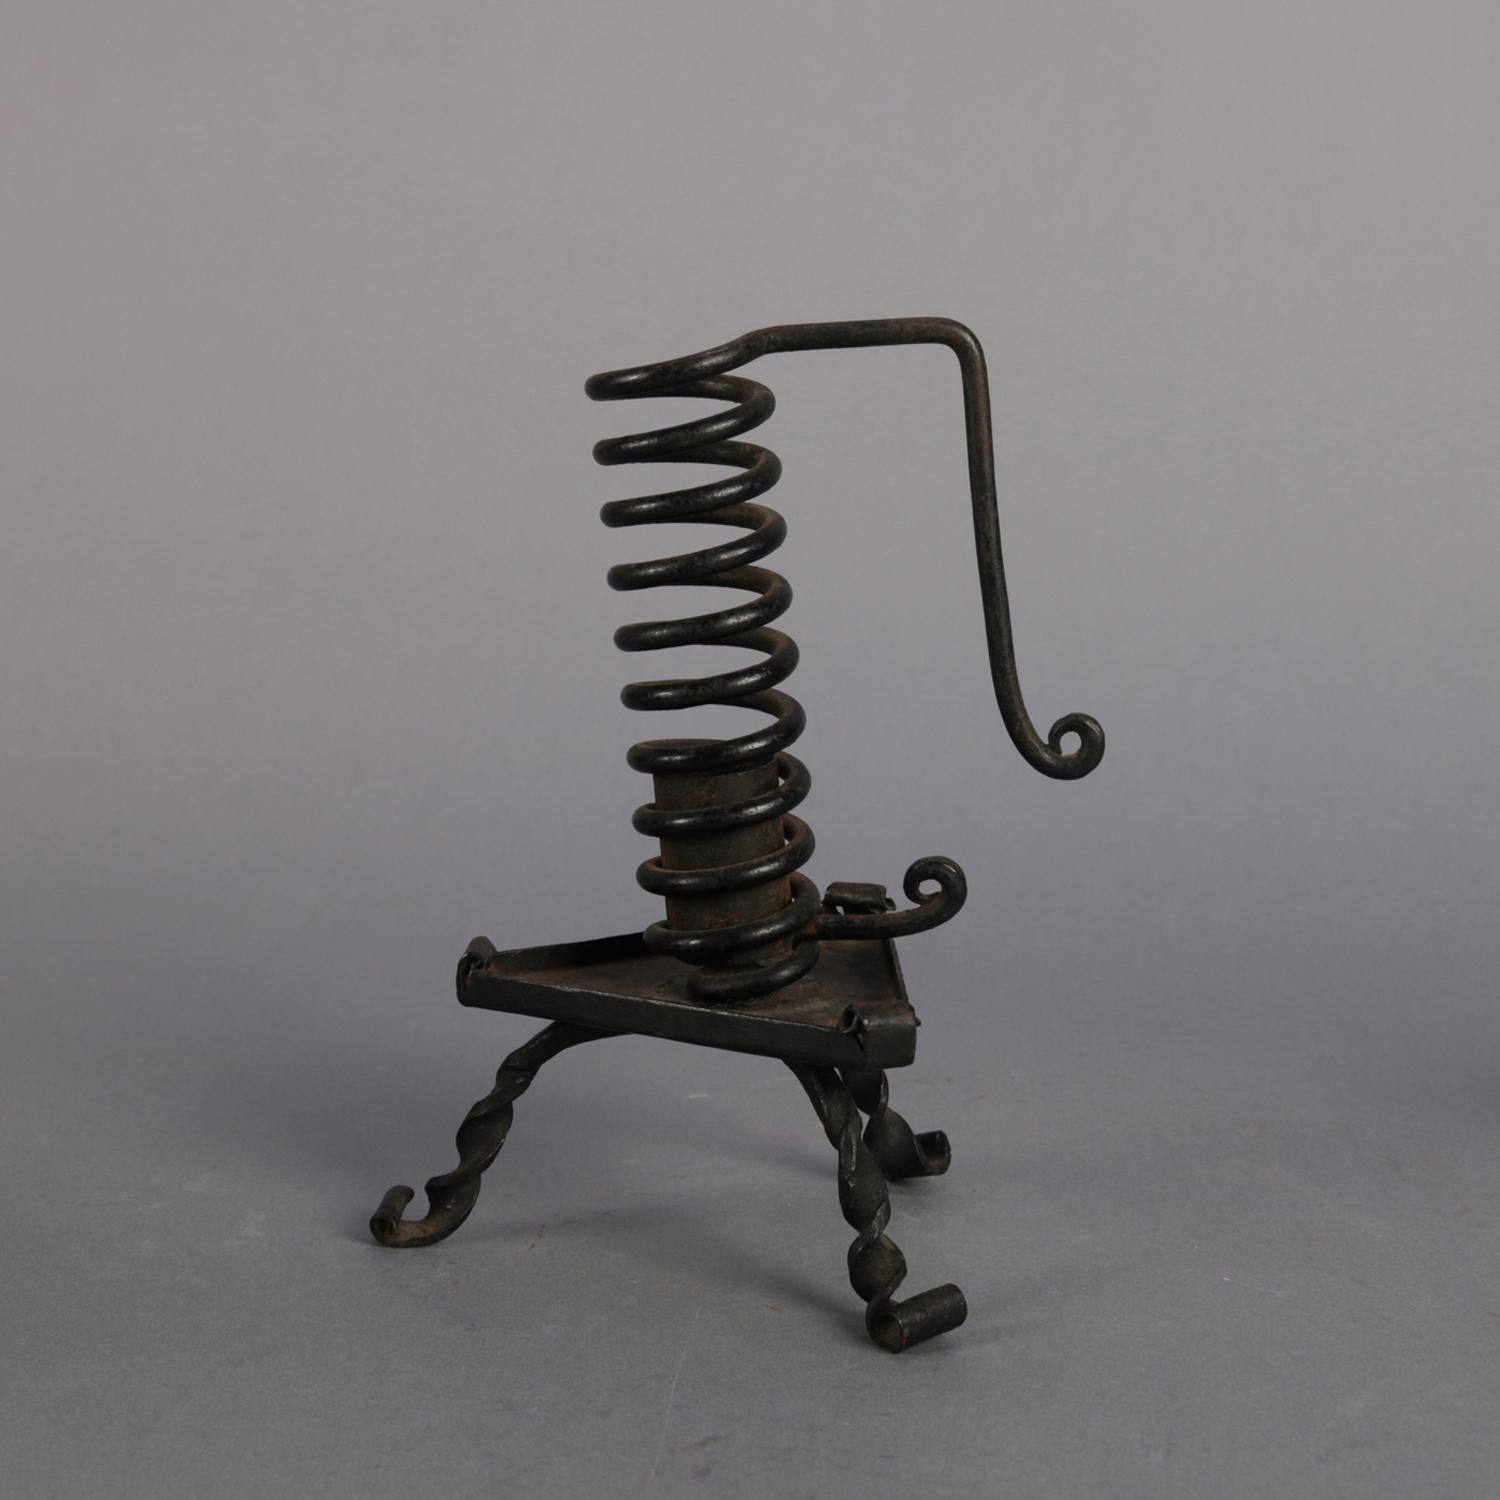 19th Century Pair of Antique Wrought Iron Hand Held Spiral Courting Candlesticks, circa 1830